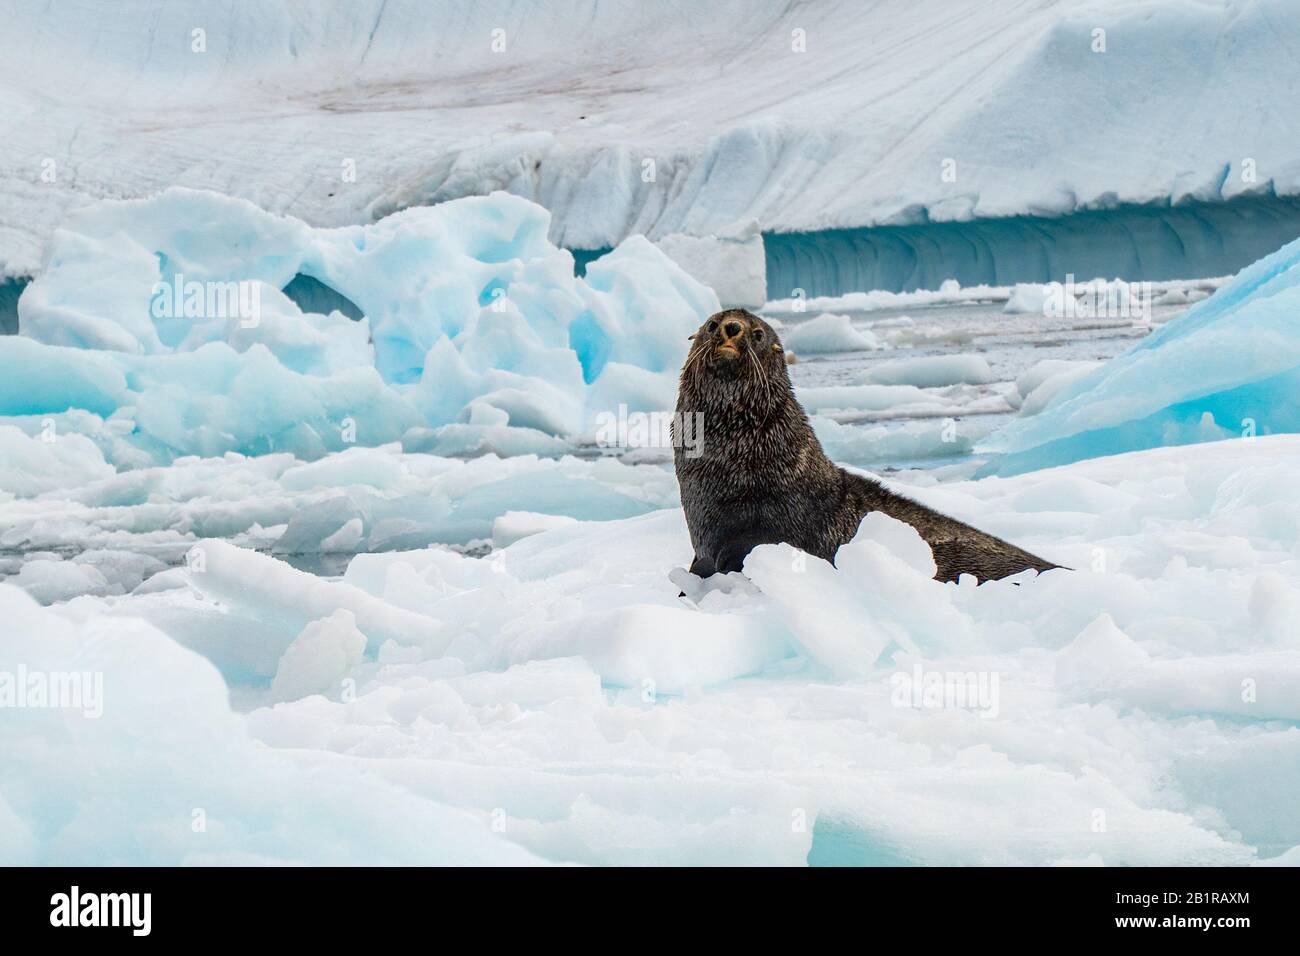 Antarctic fur seals (Arctocephalus gazella) on pack ice. The Antarctic fur seal feeds mainly on krill, but it also eats squid and fish. It is primaril Stock Photo